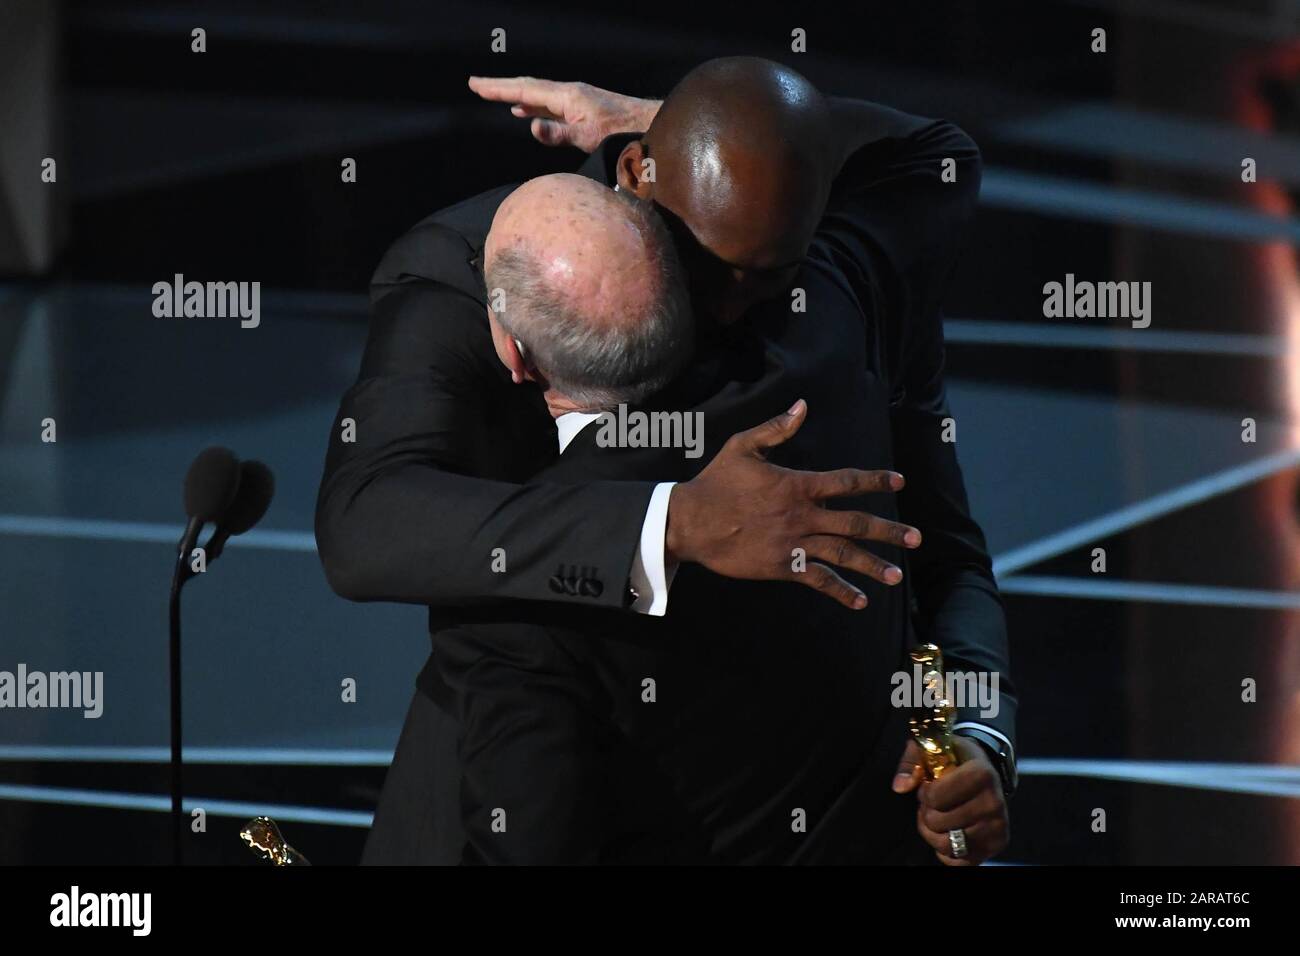 March 4, 2018; Hollywood, CA, USA; Glen Keane and Kobe Bryant accept the Oscar for best animated short film for 'Dear Basketball' at Dolby Theater. Mandatory Credit: Robert Deutsch-USA TODAY NETWORK/Sipa USA (Robert Deutsch/IPA/Fotogramma, Los Angeles - 2018-03-04) ps the photo can be used in respect of the context in which it was taken, and without defamatory intent of the decorum of the people represented Editorial Usage Only Stock Photo